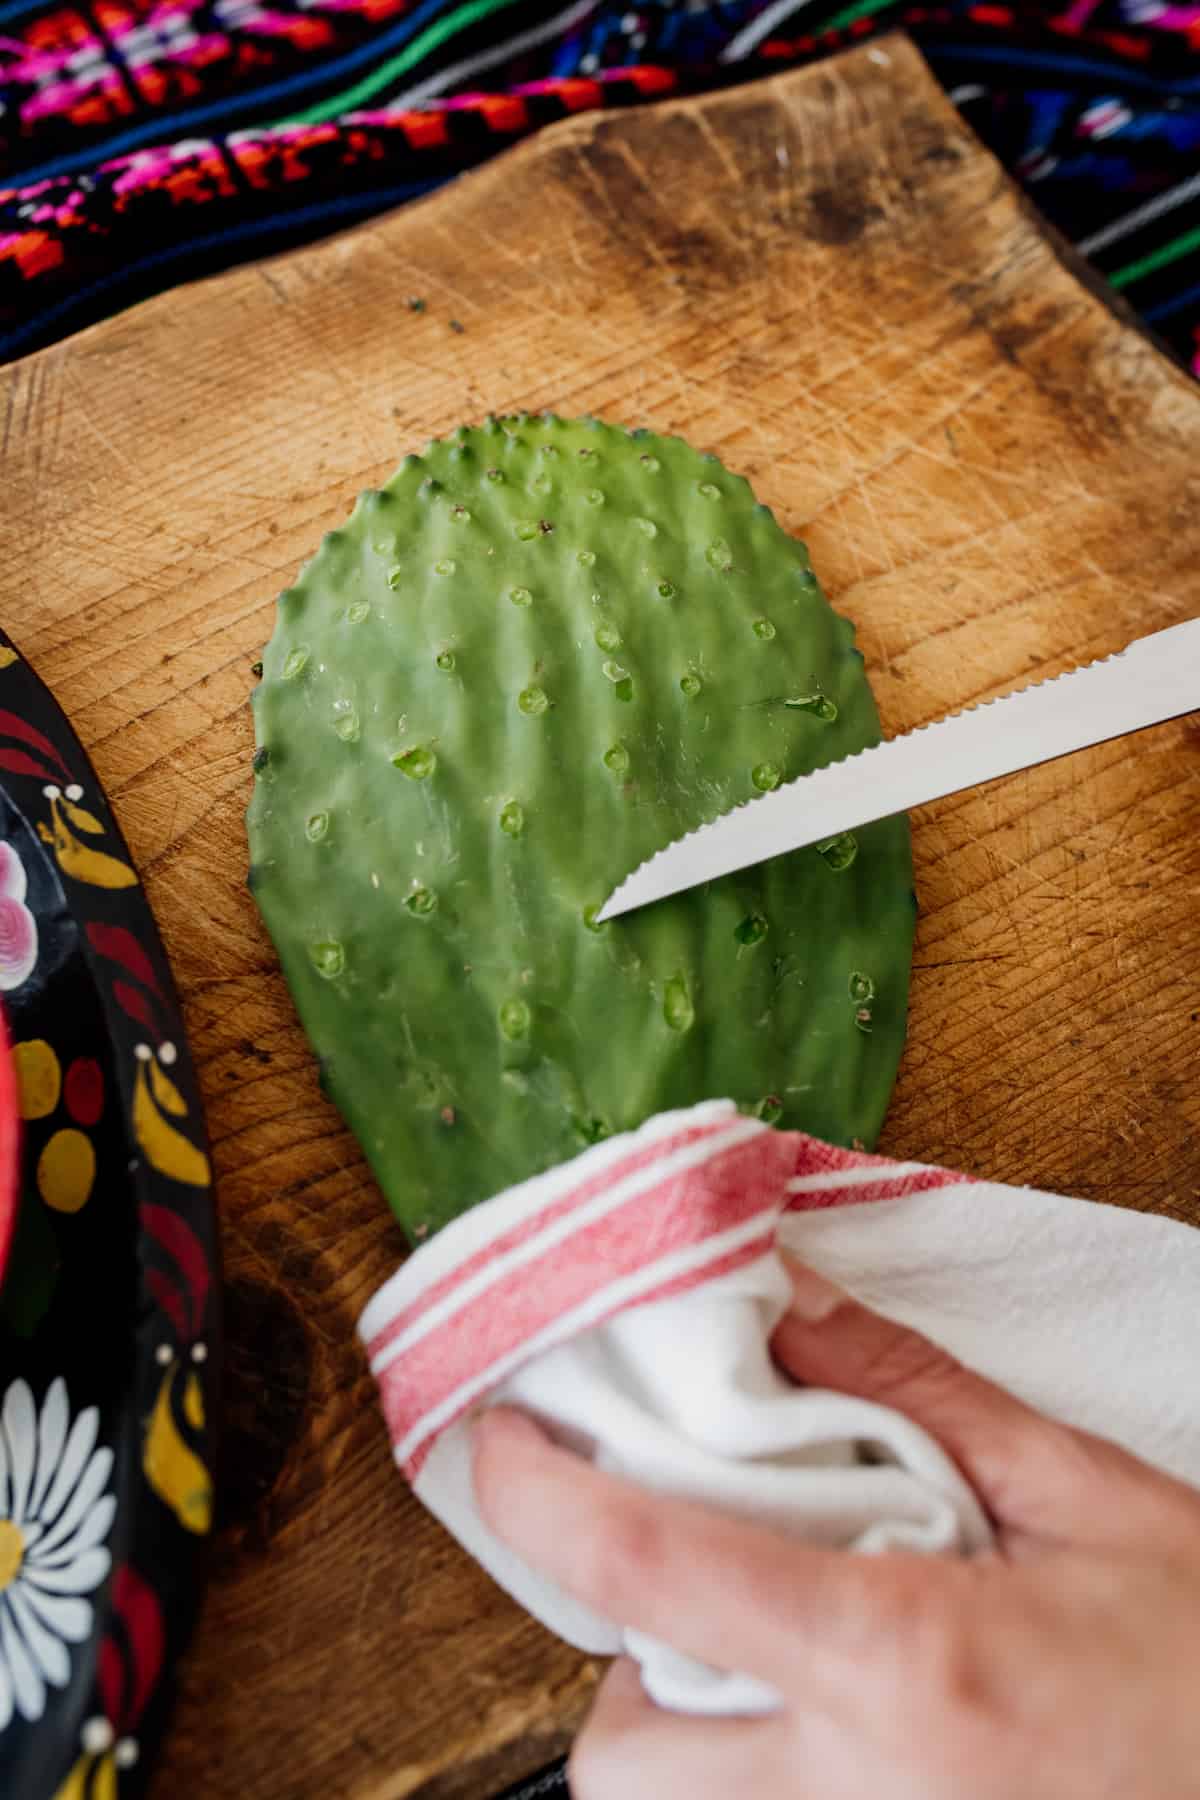 process shot - holding a nopal cactus paddle showing how to remove spines with a knife moving against the grains of the thorns and away from the person holding the knife.